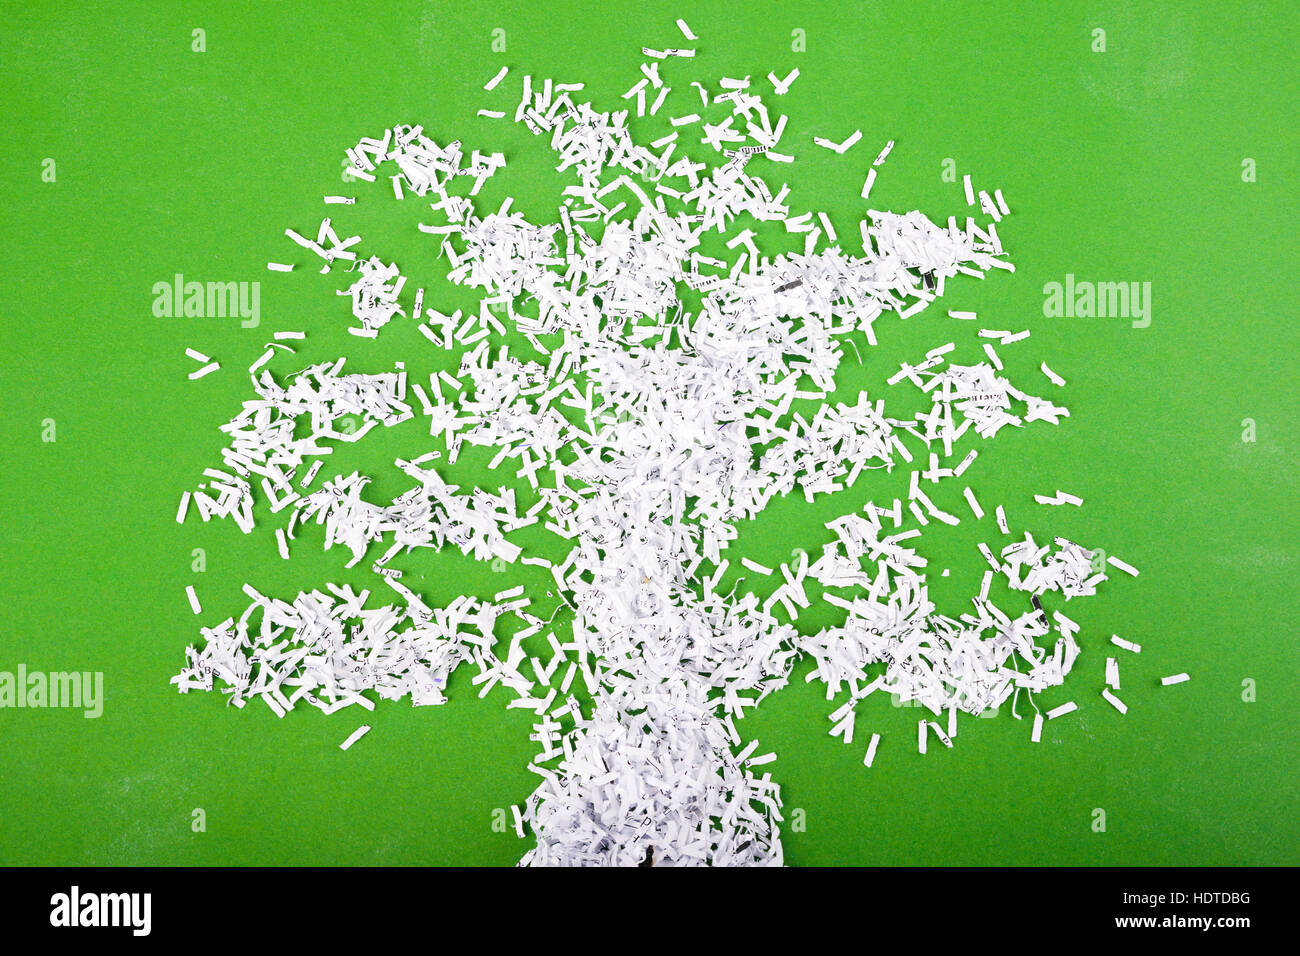 simple green tree symbol made from shredded paper particles on green background Stock Photo